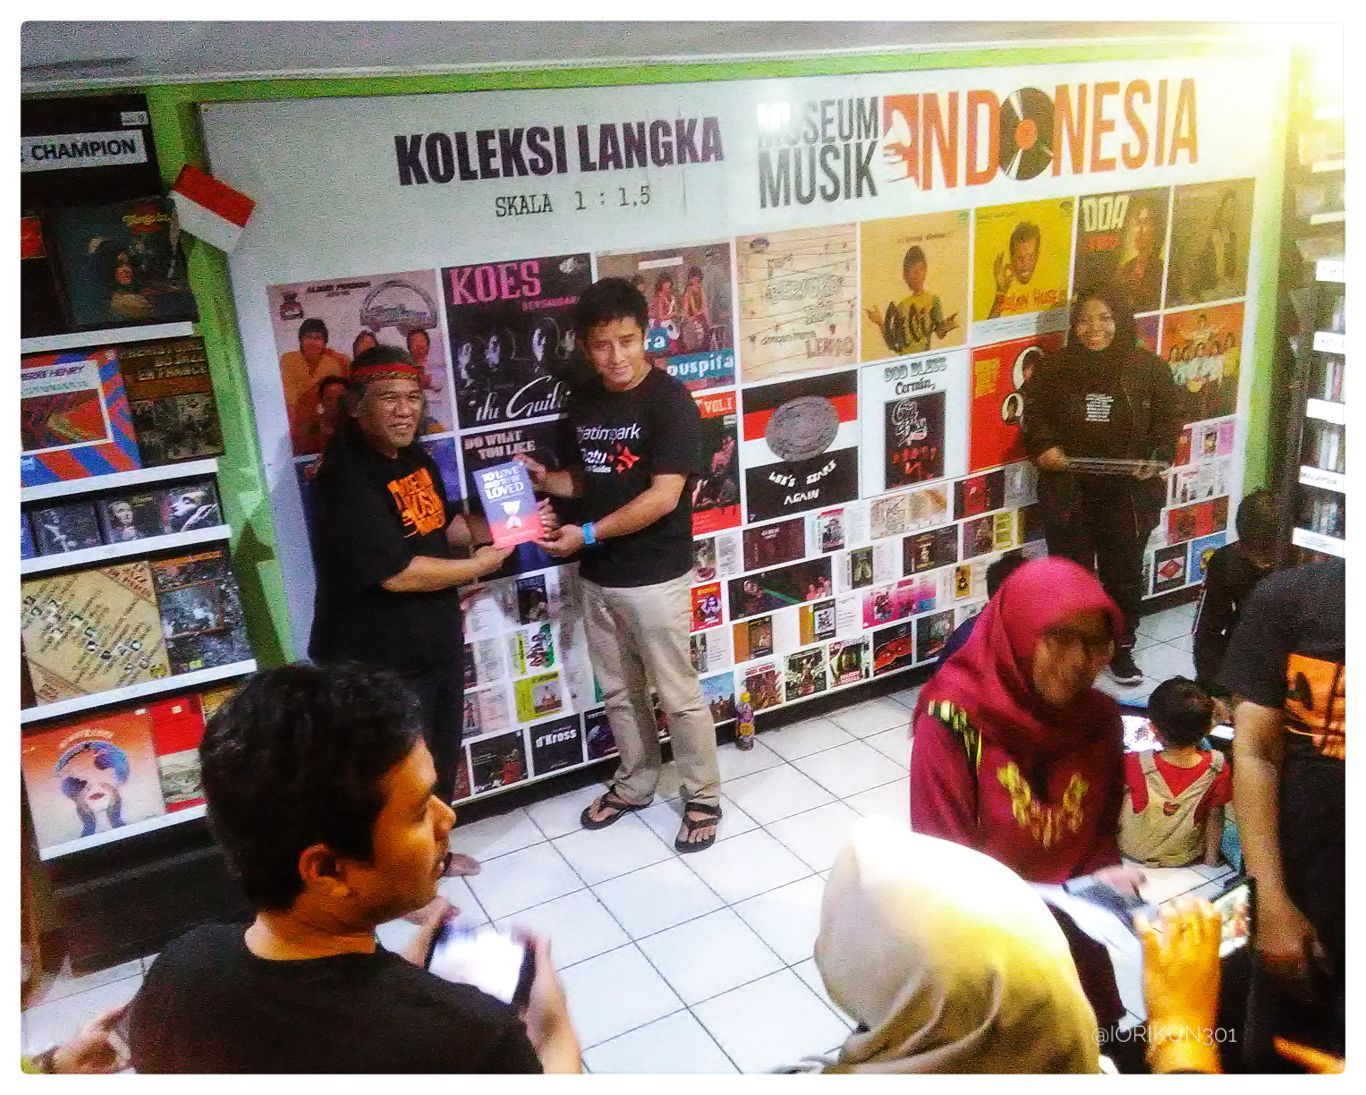 Mr. Hengky (left), Museum Musik Indonesia's Director, giving us a book as souvenir